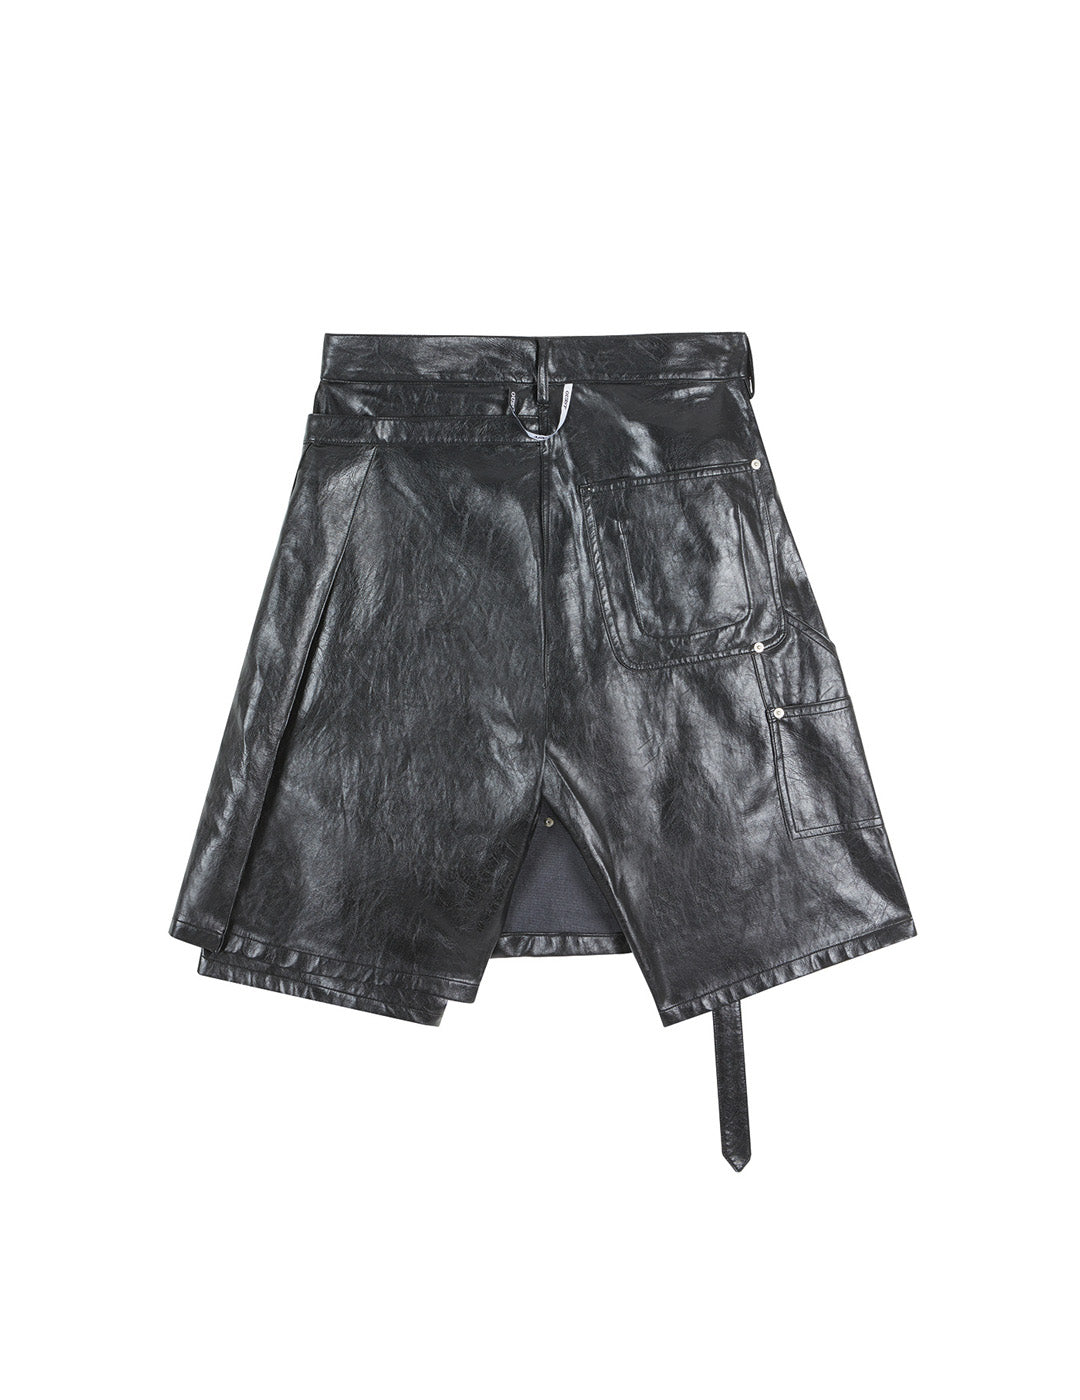 THE APRON SHORTS IN BLACK FAUX LEATHER